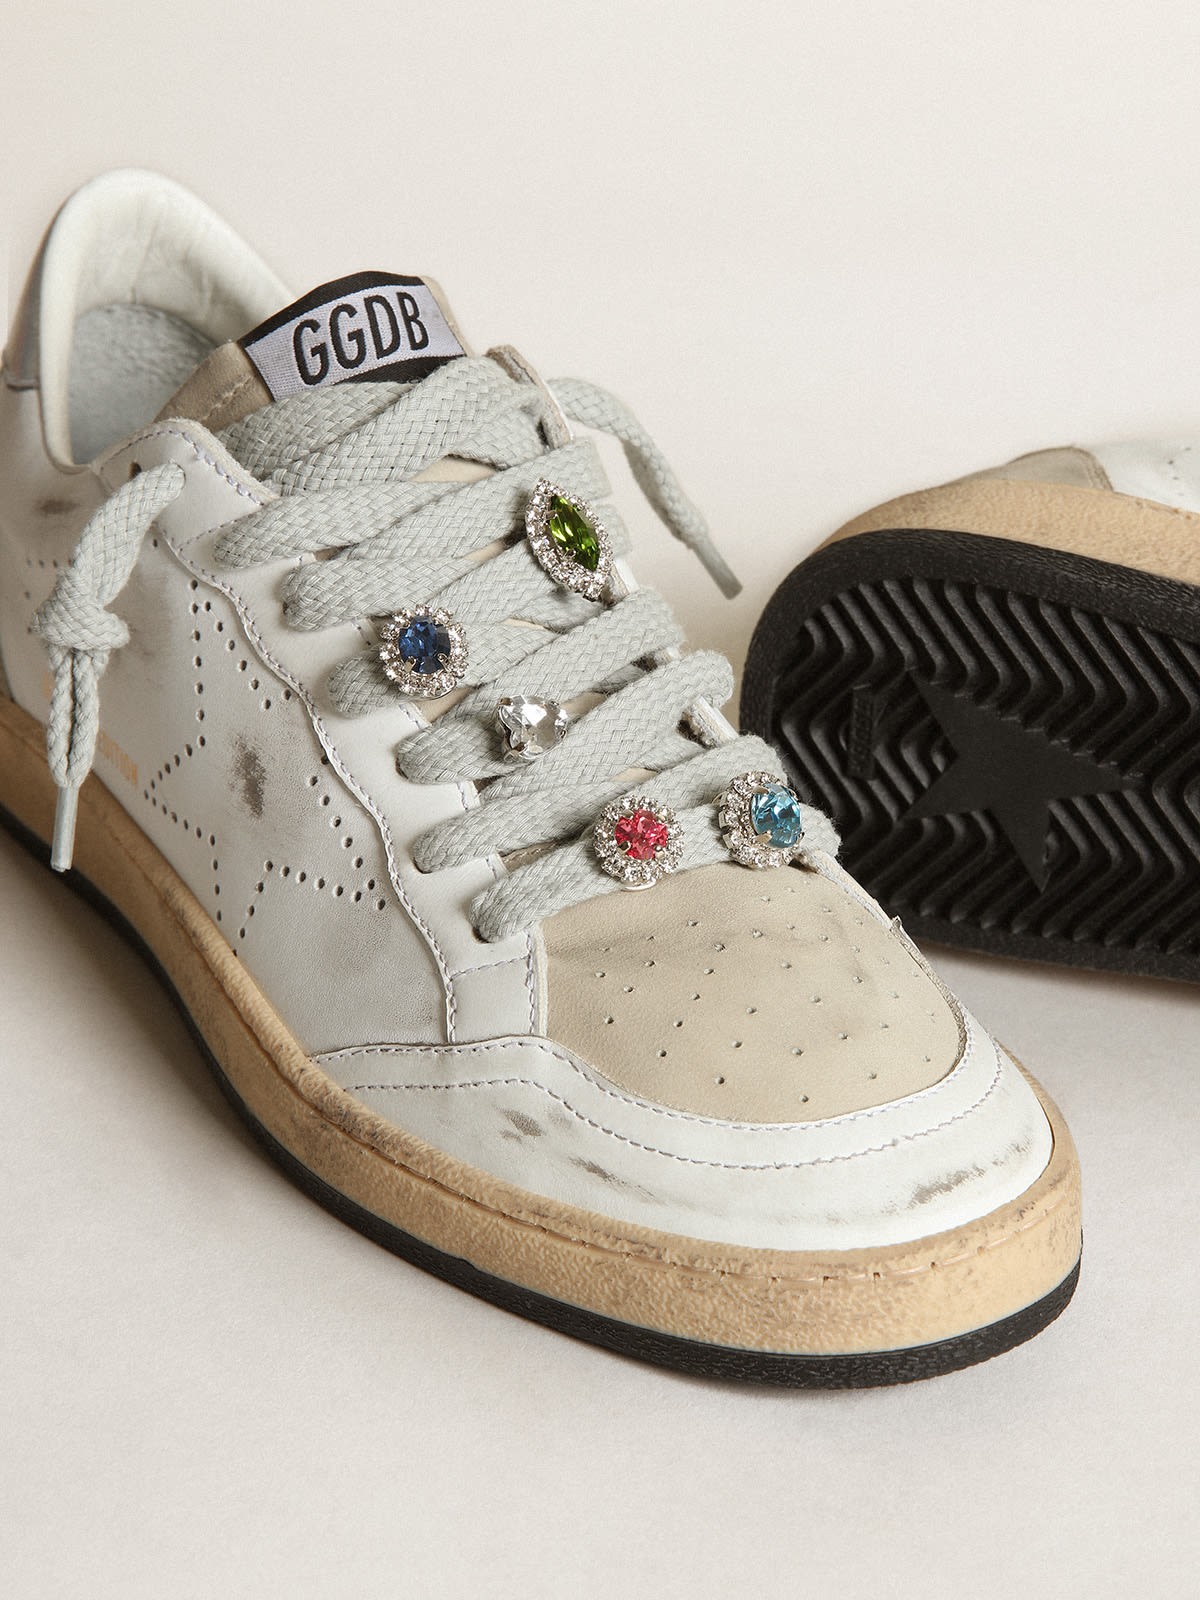 Golden Goose - Ball Star LAB sneakers in white leather with perforated star and lace accessories with multicolored crystals in 